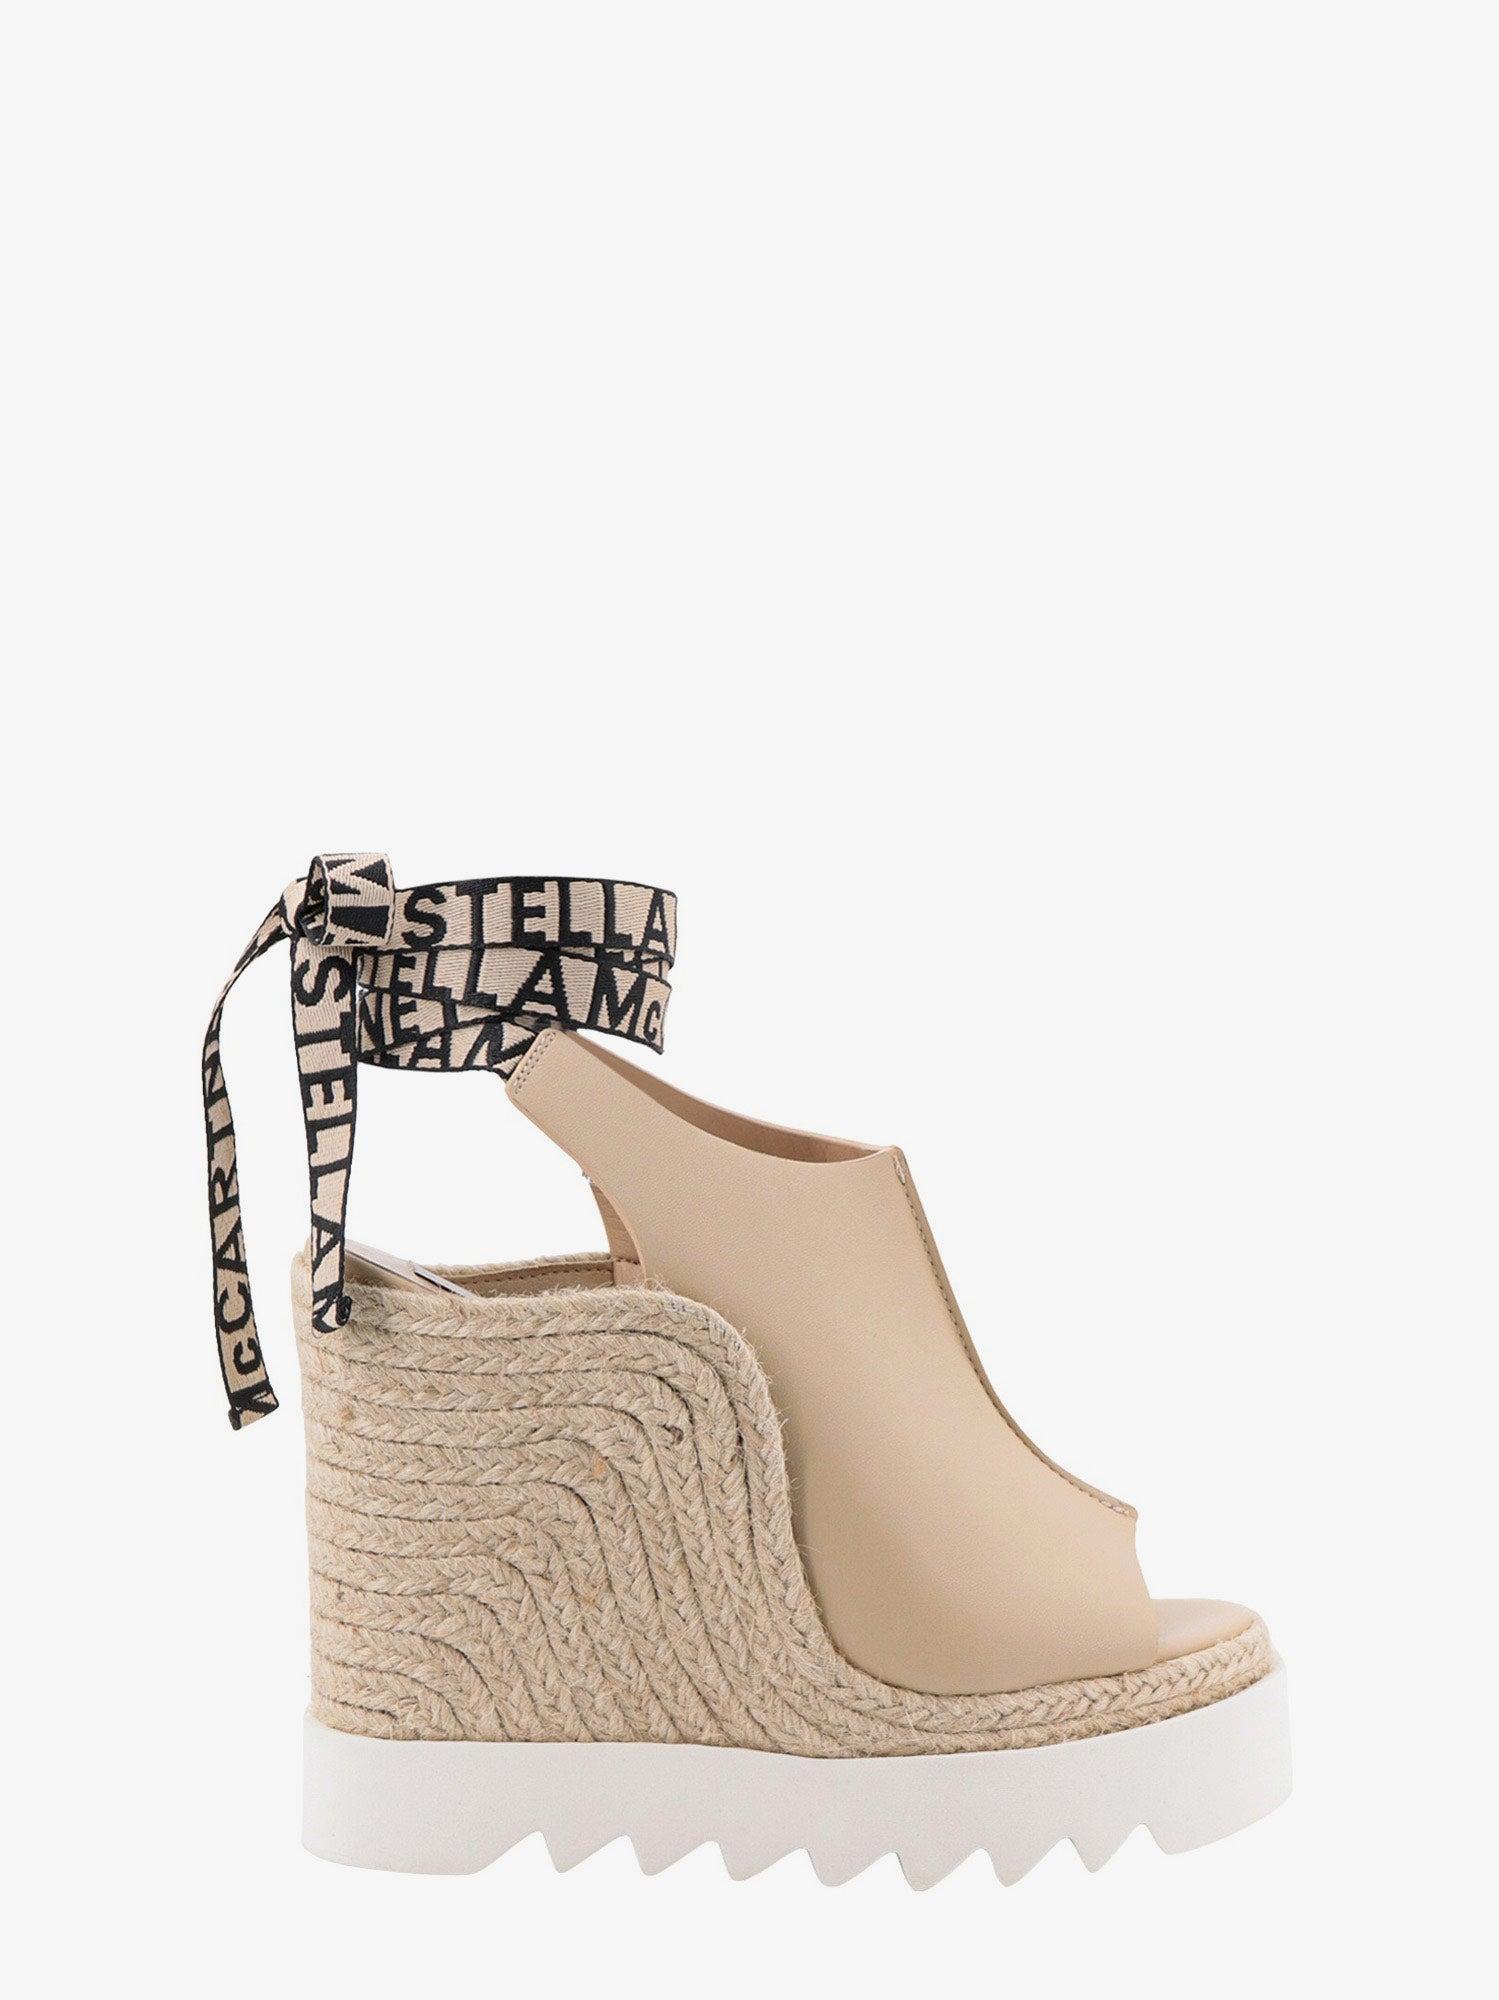 Stella McCartney Wedges in Natural | Lyst